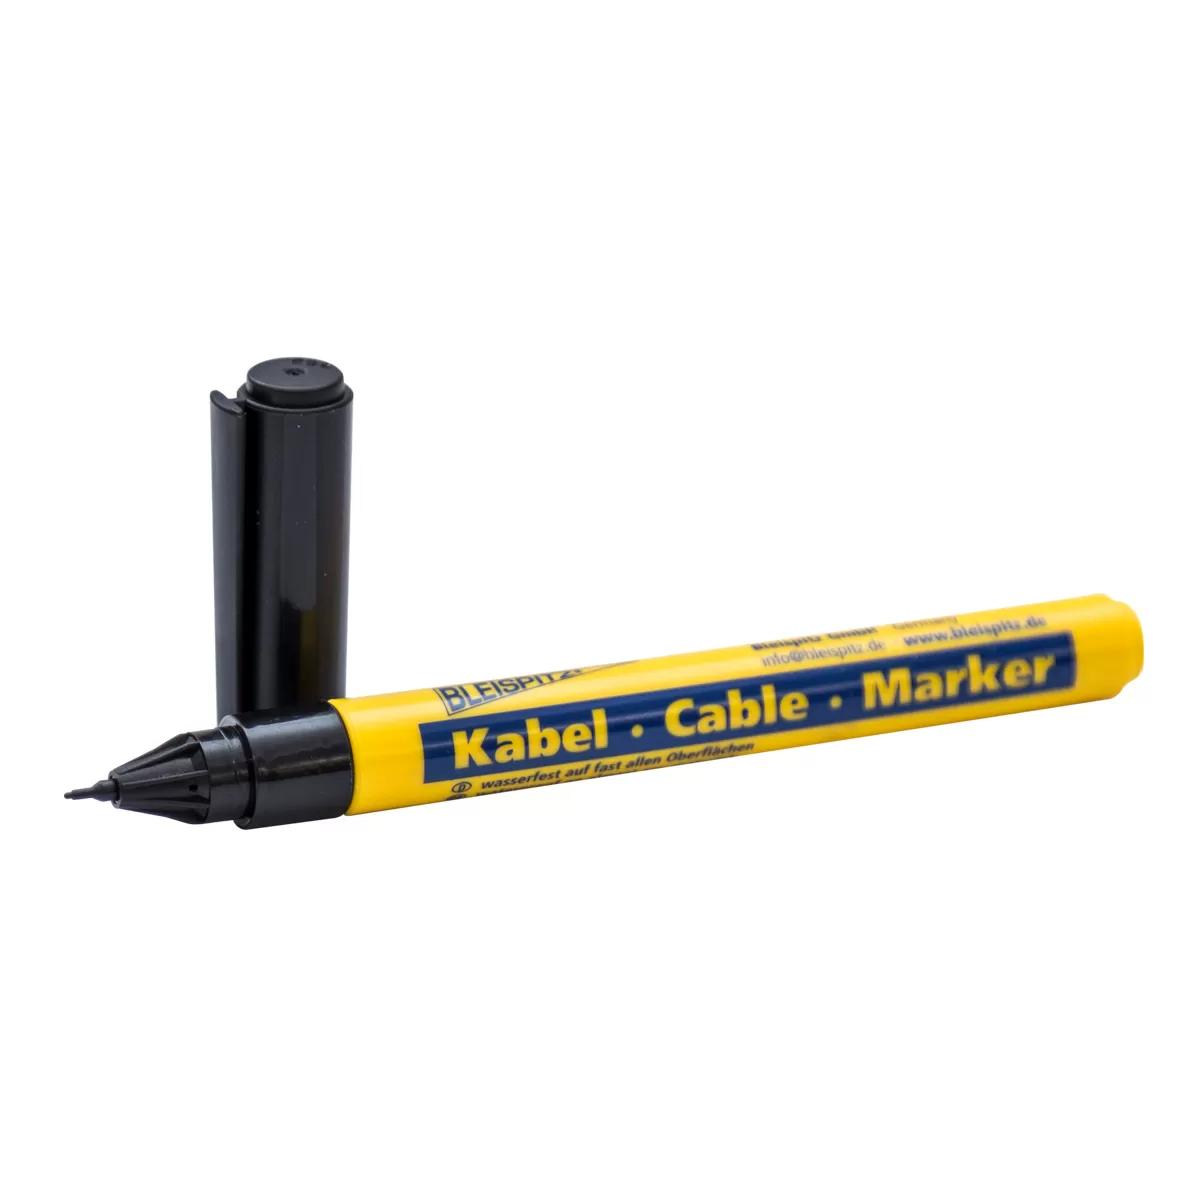 Cable marker 0.75 mm 